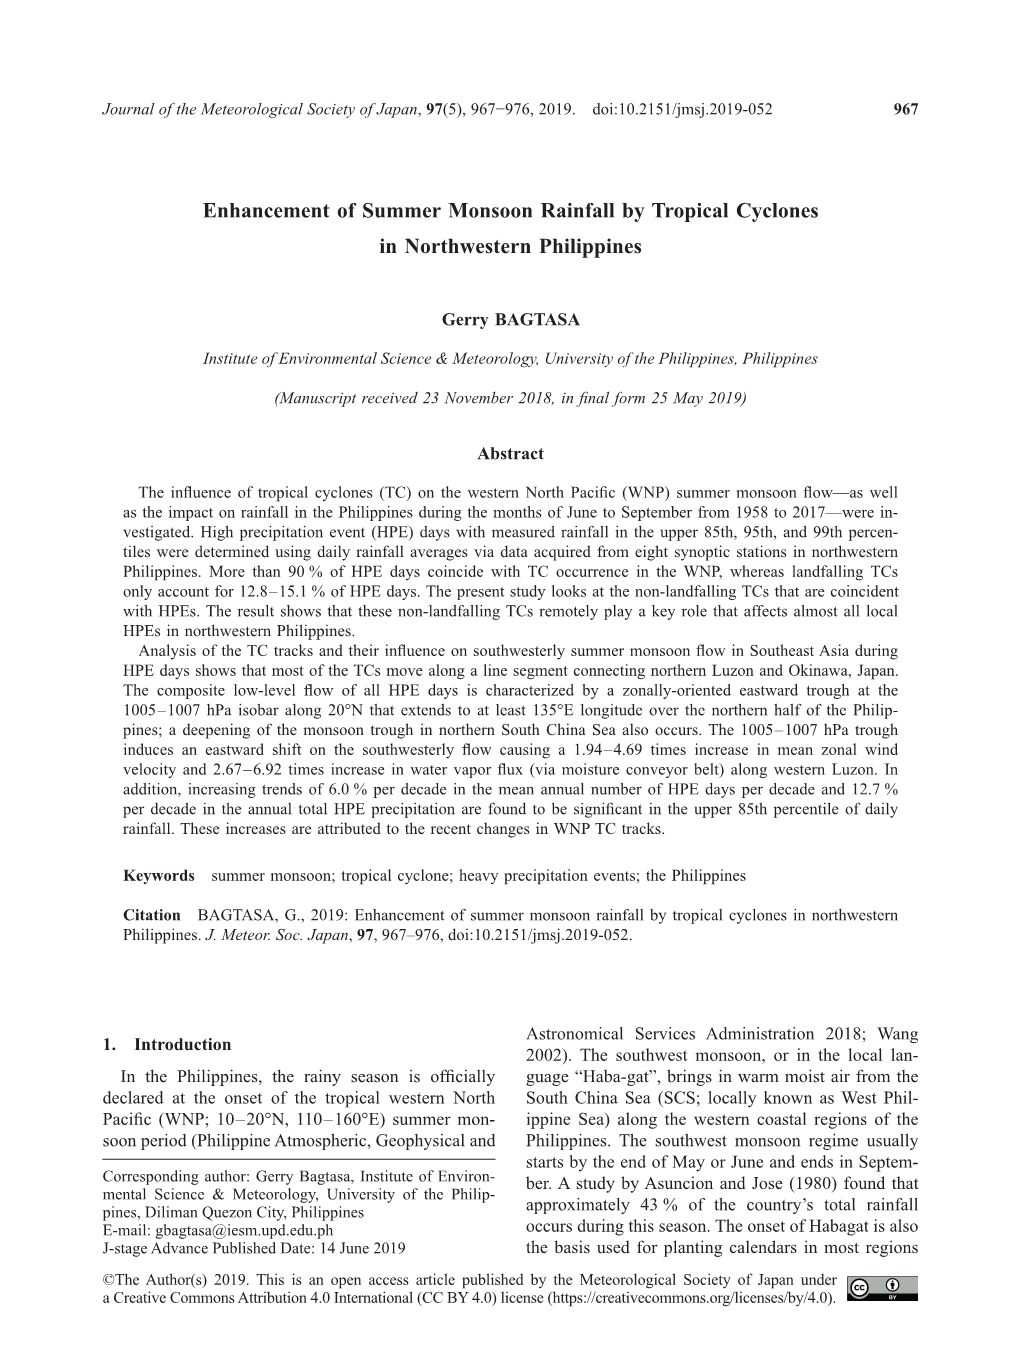 Enhancement of Summer Monsoon Rainfall by Tropical Cyclones in Northwestern Philippines